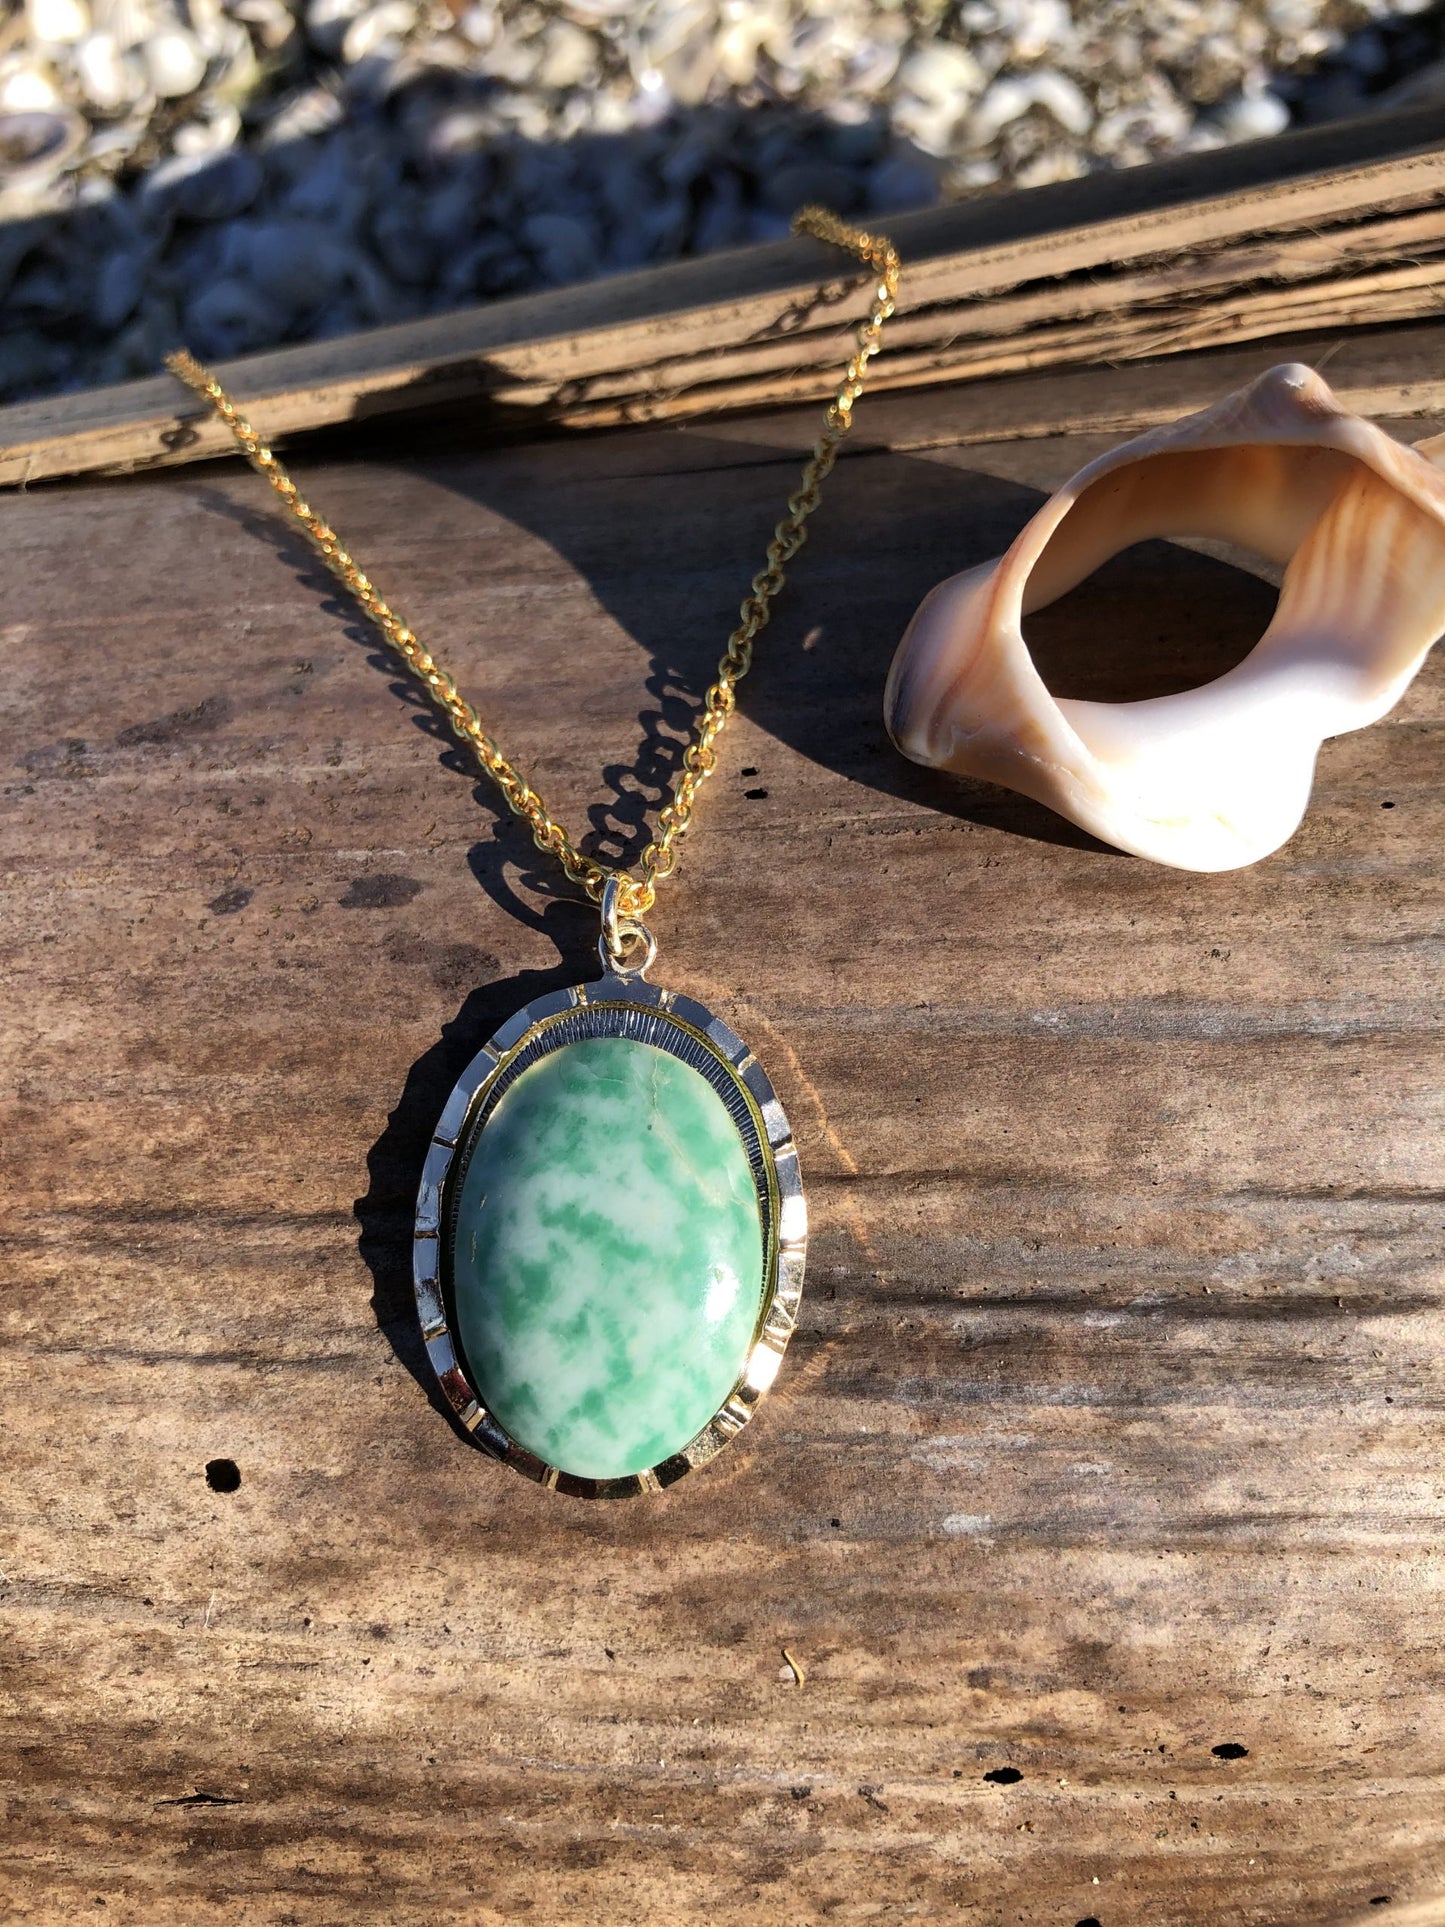 Necklace with an unusual mix of green jade in white quartz, found on a beach in California, USA and hand polished to a 25x18mm cabochon and set in a gold plated setting with 19 inch chain, on stone